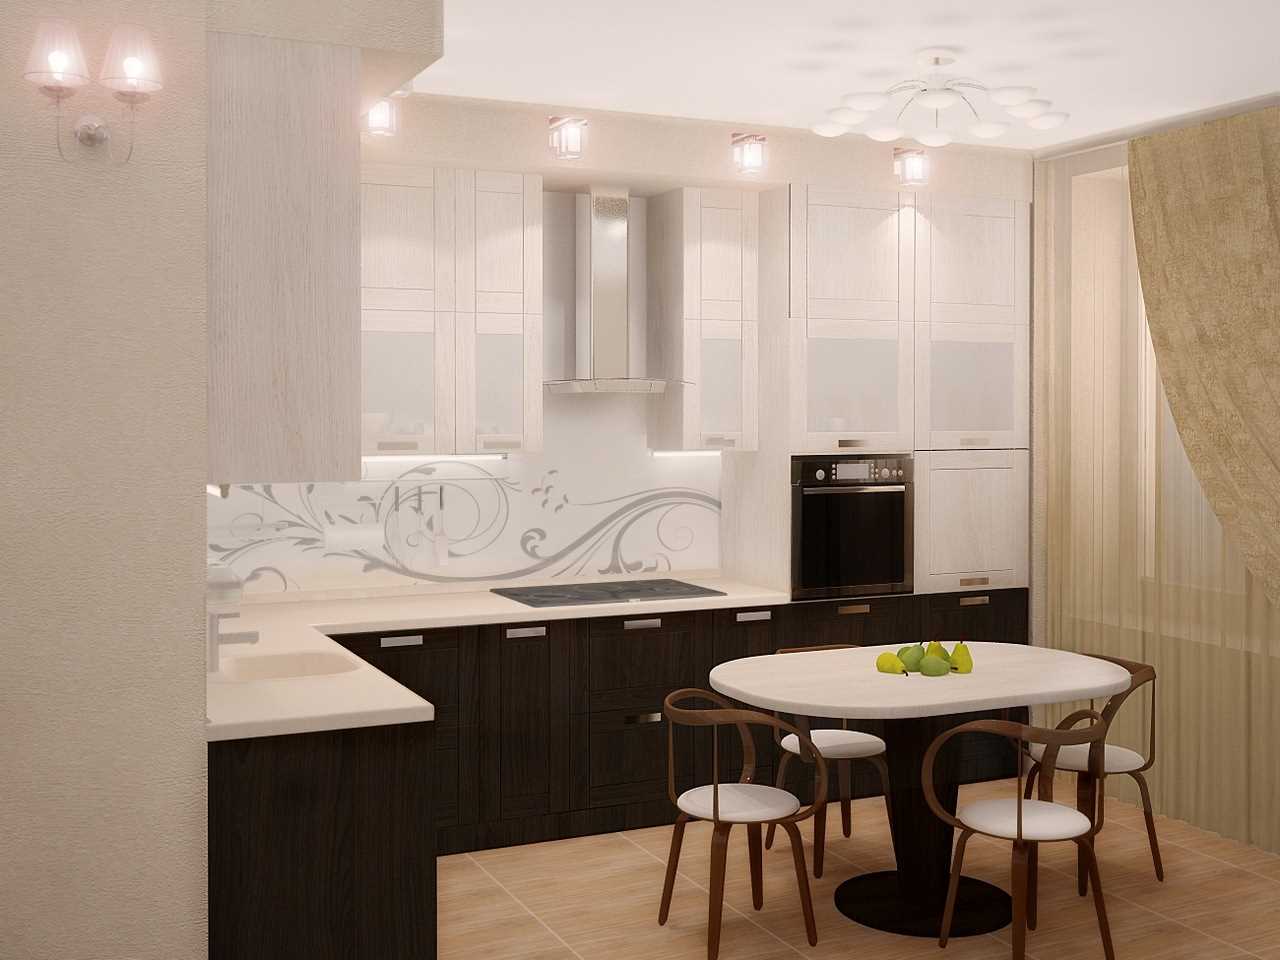 variant of the bright interior of the kitchen 9 sq.m